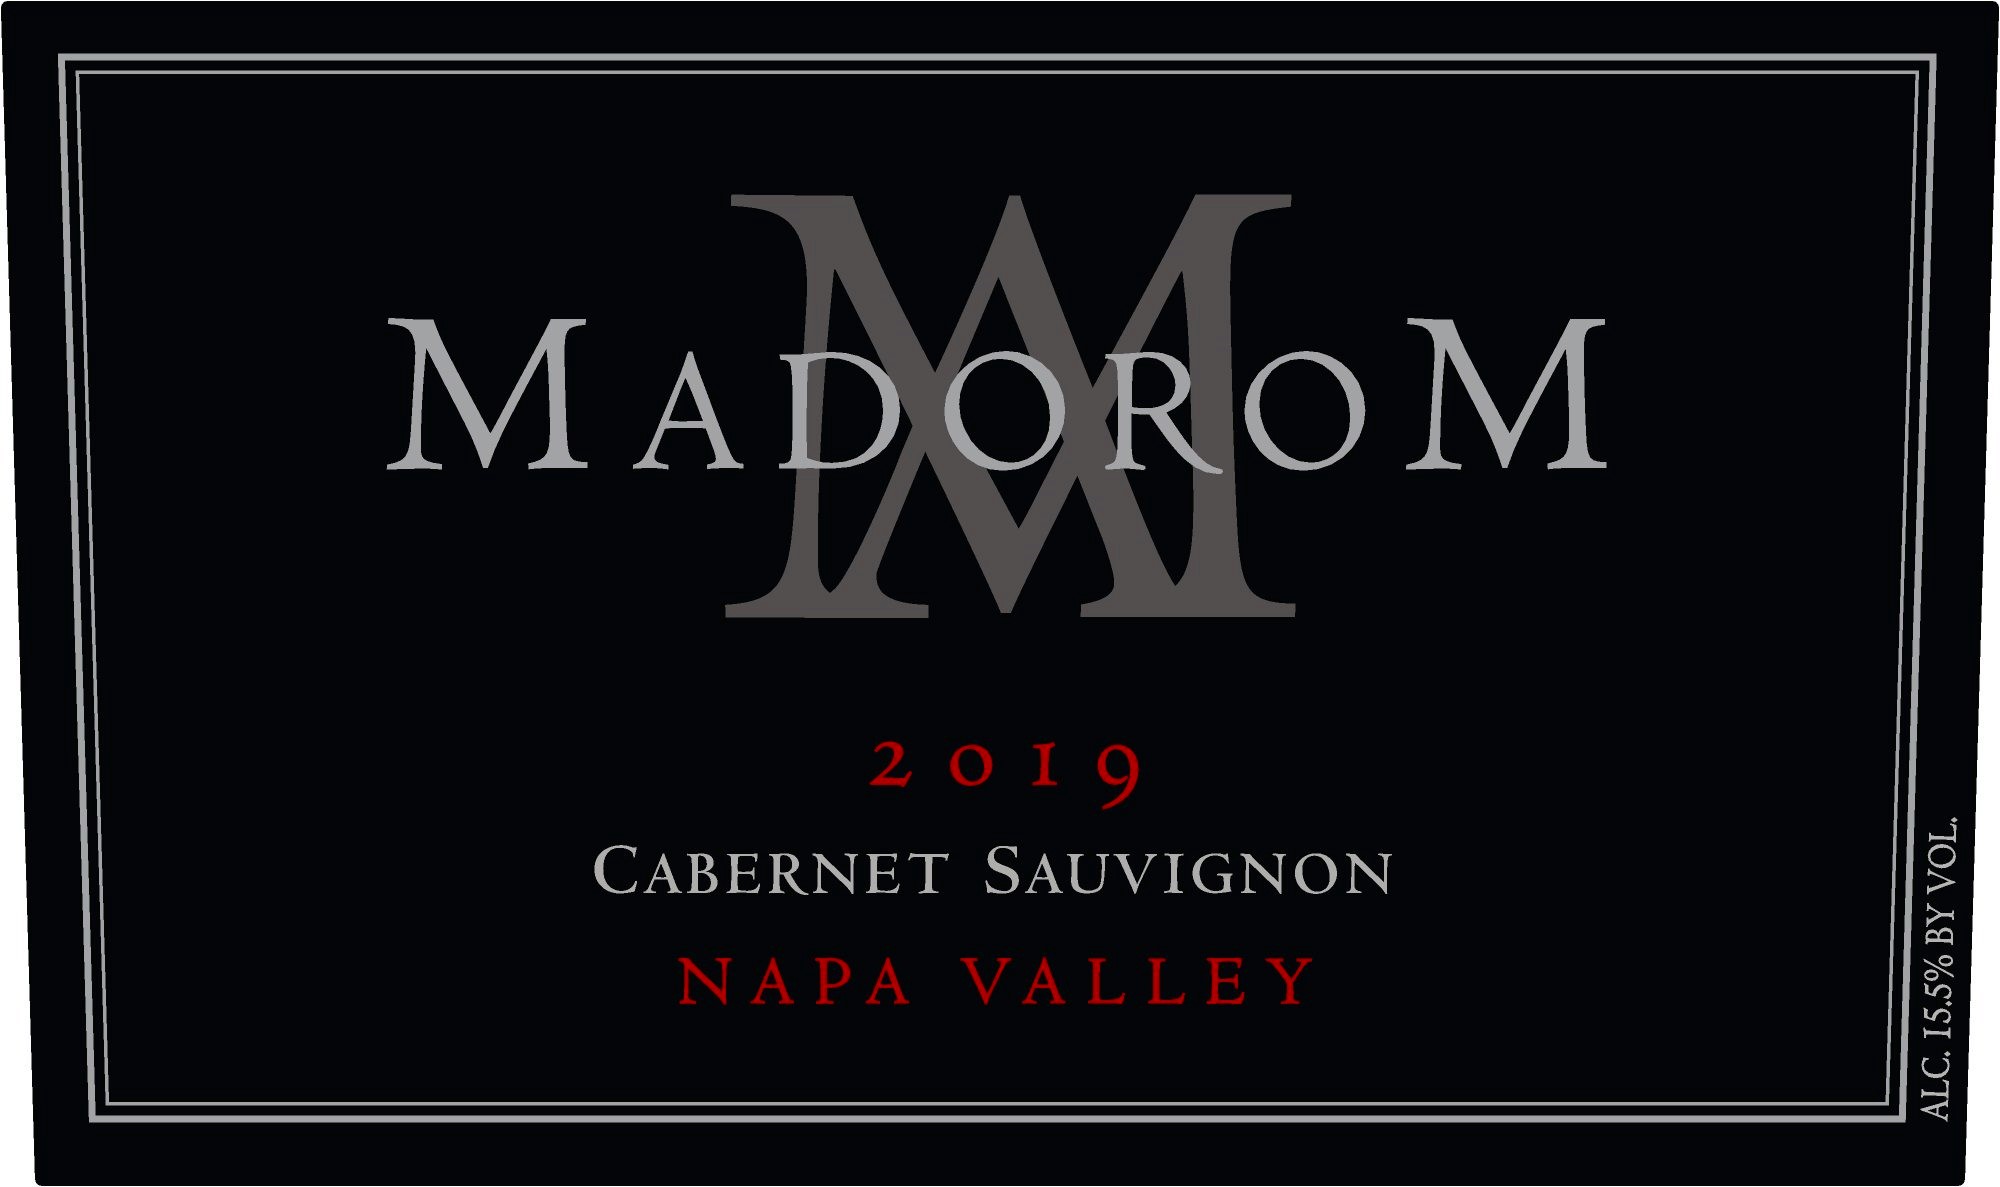 Product Image for 2019 MadoroM Napa Valley Cabernet Sauvignon